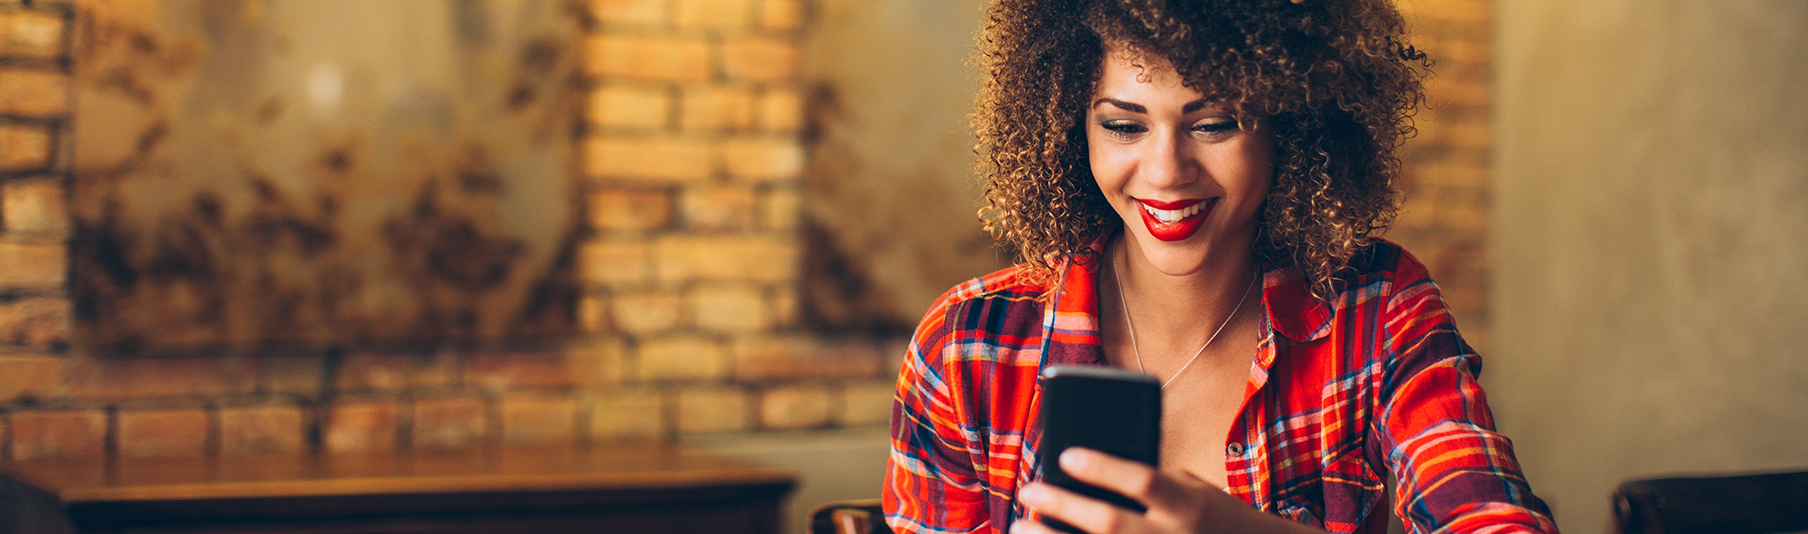 Personal Insurance: A young woman smiling while looking at her phone